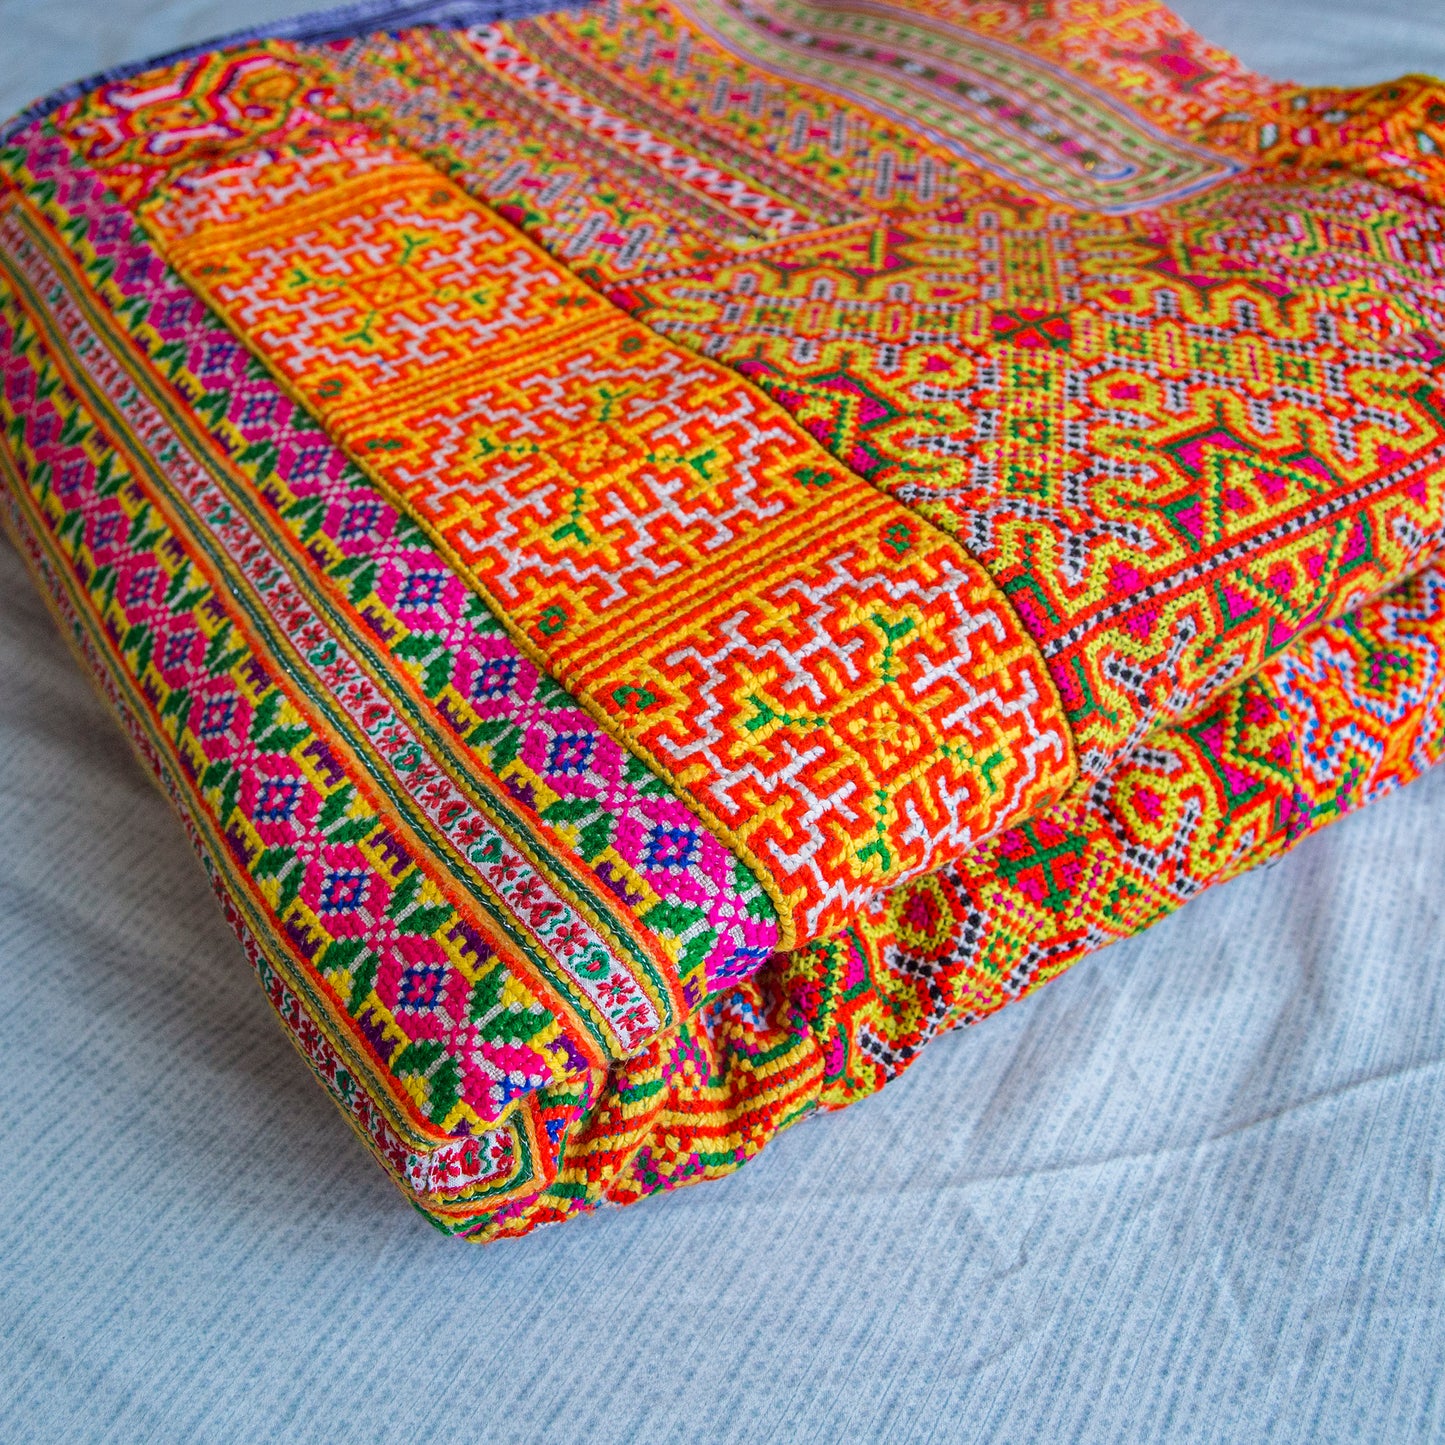 One of its kind cross stitched embroidery bed cover, authentic H'mong fabric, dual-sized, king and queen sized beds